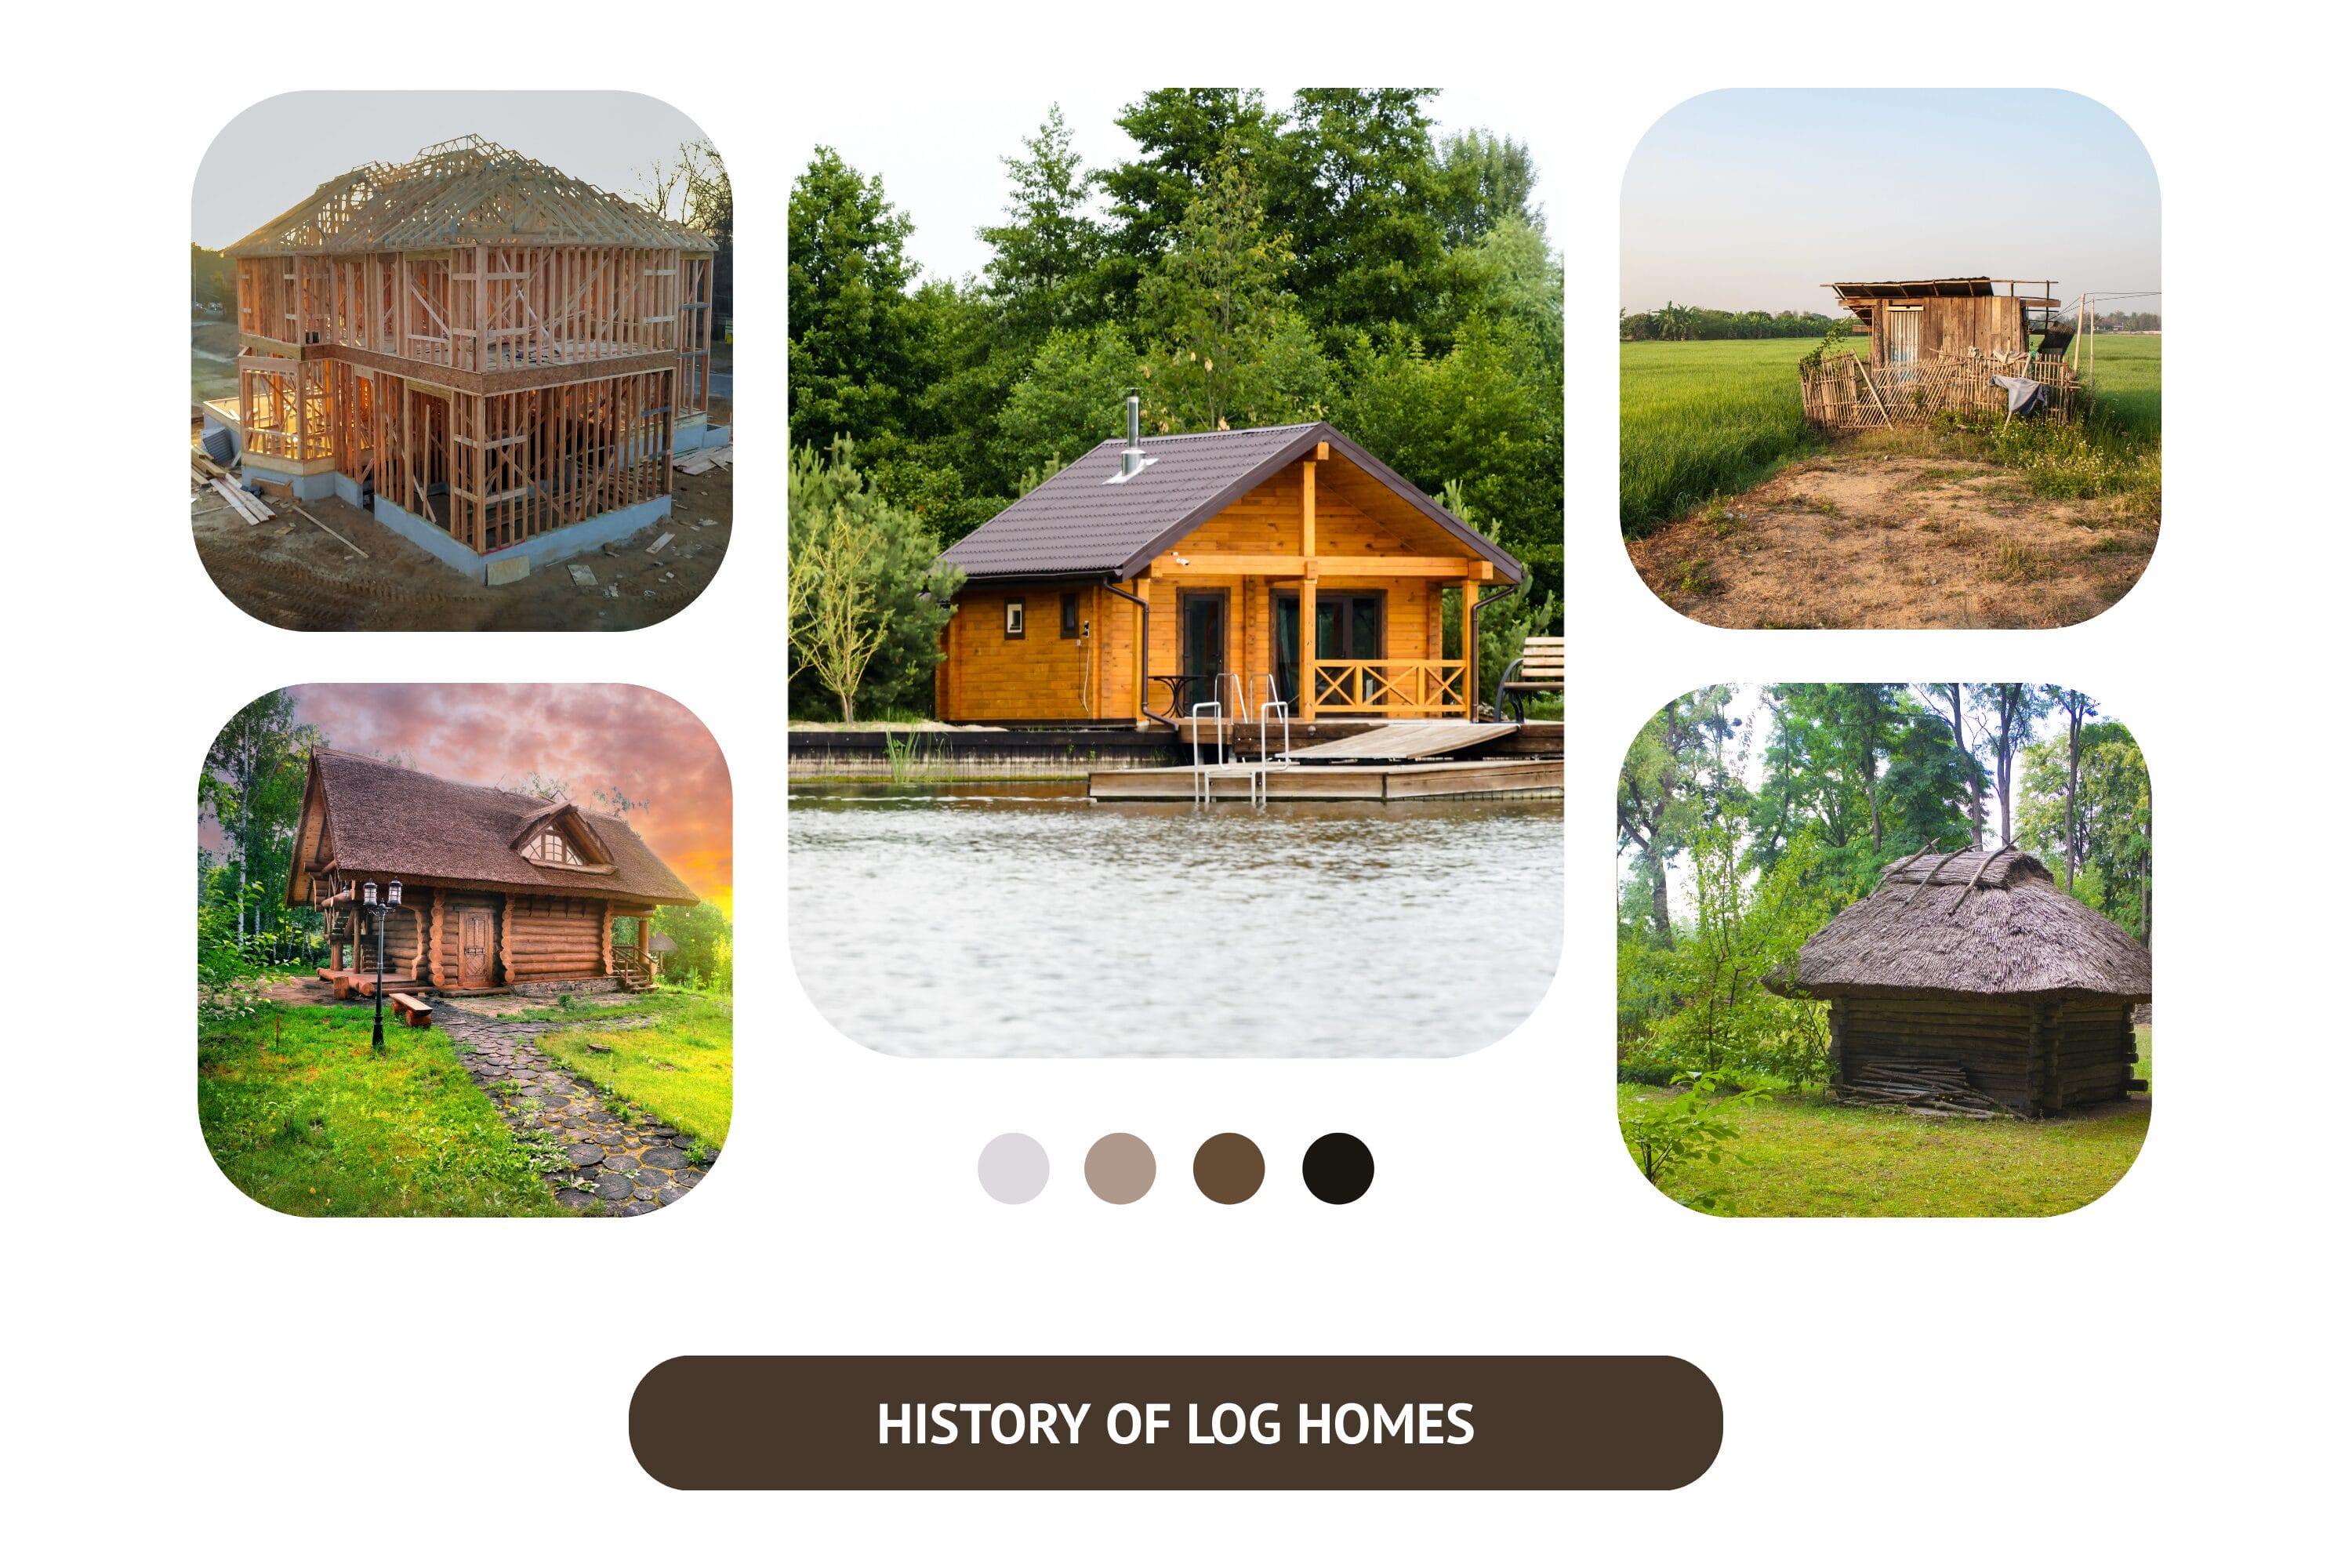 The history of modular log homes dates back to several decades ago.